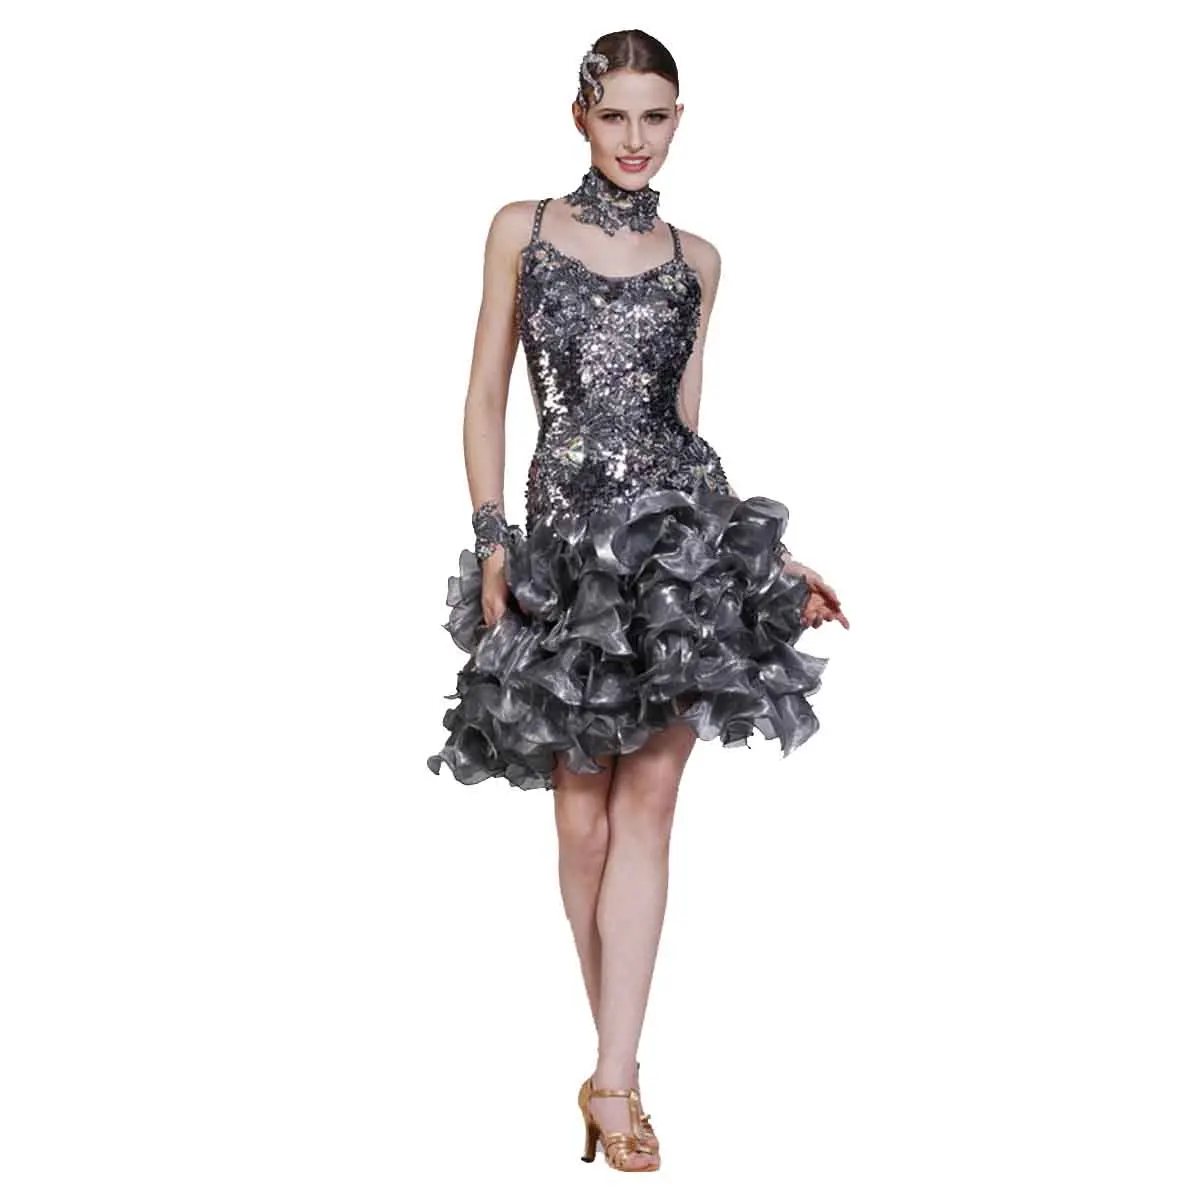 

L-13102 New sequins national standard Latin performance clothing performance competition dance dress for adults, Customer choice